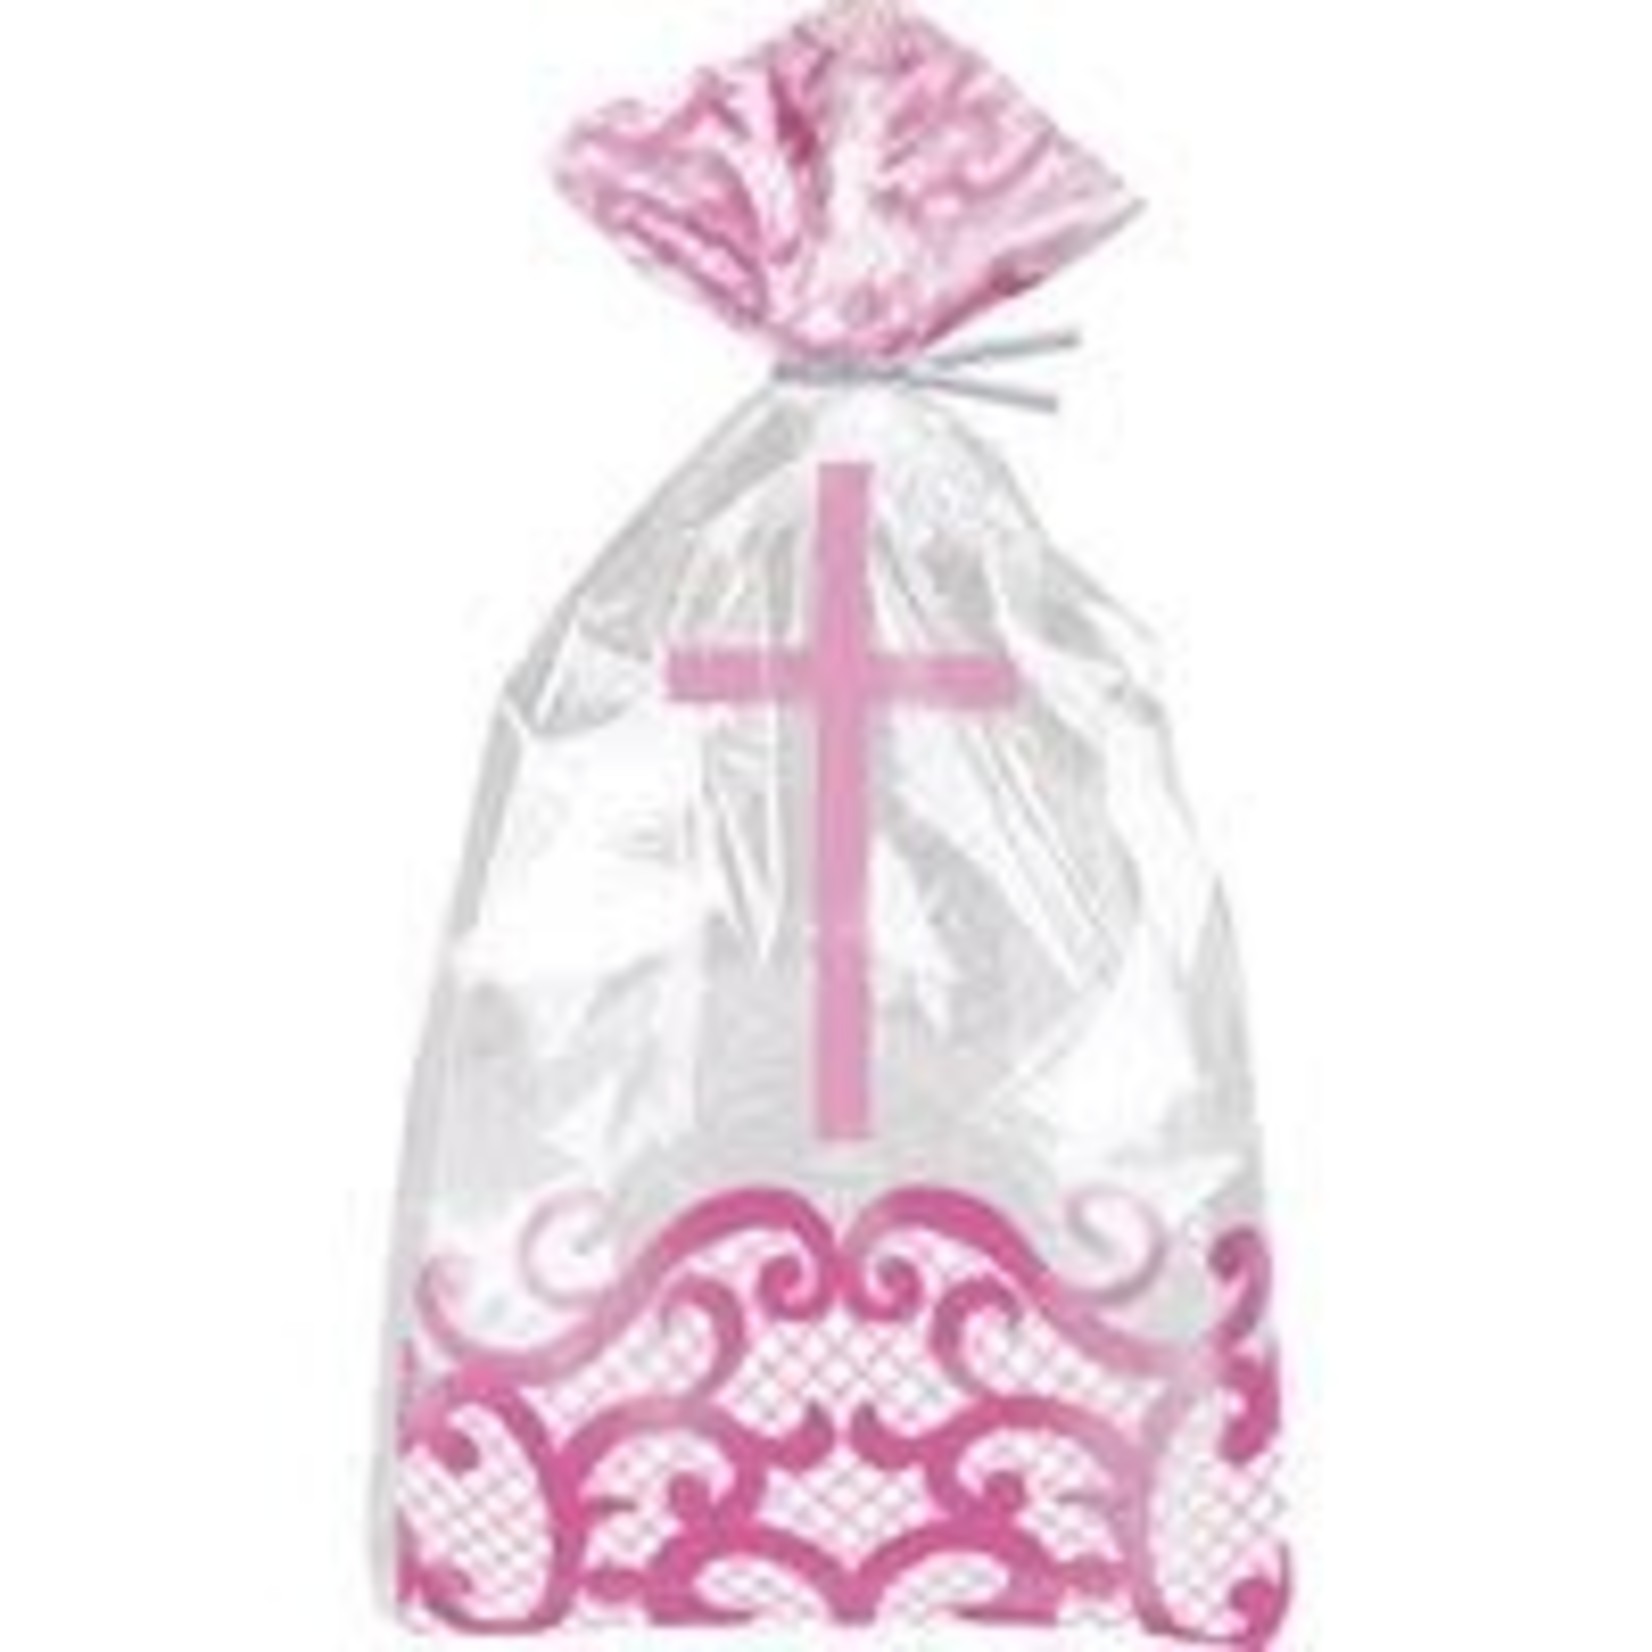 Fancy Pink Cross Large Cello Bags w/ Ties - 20ct. - Party Adventure